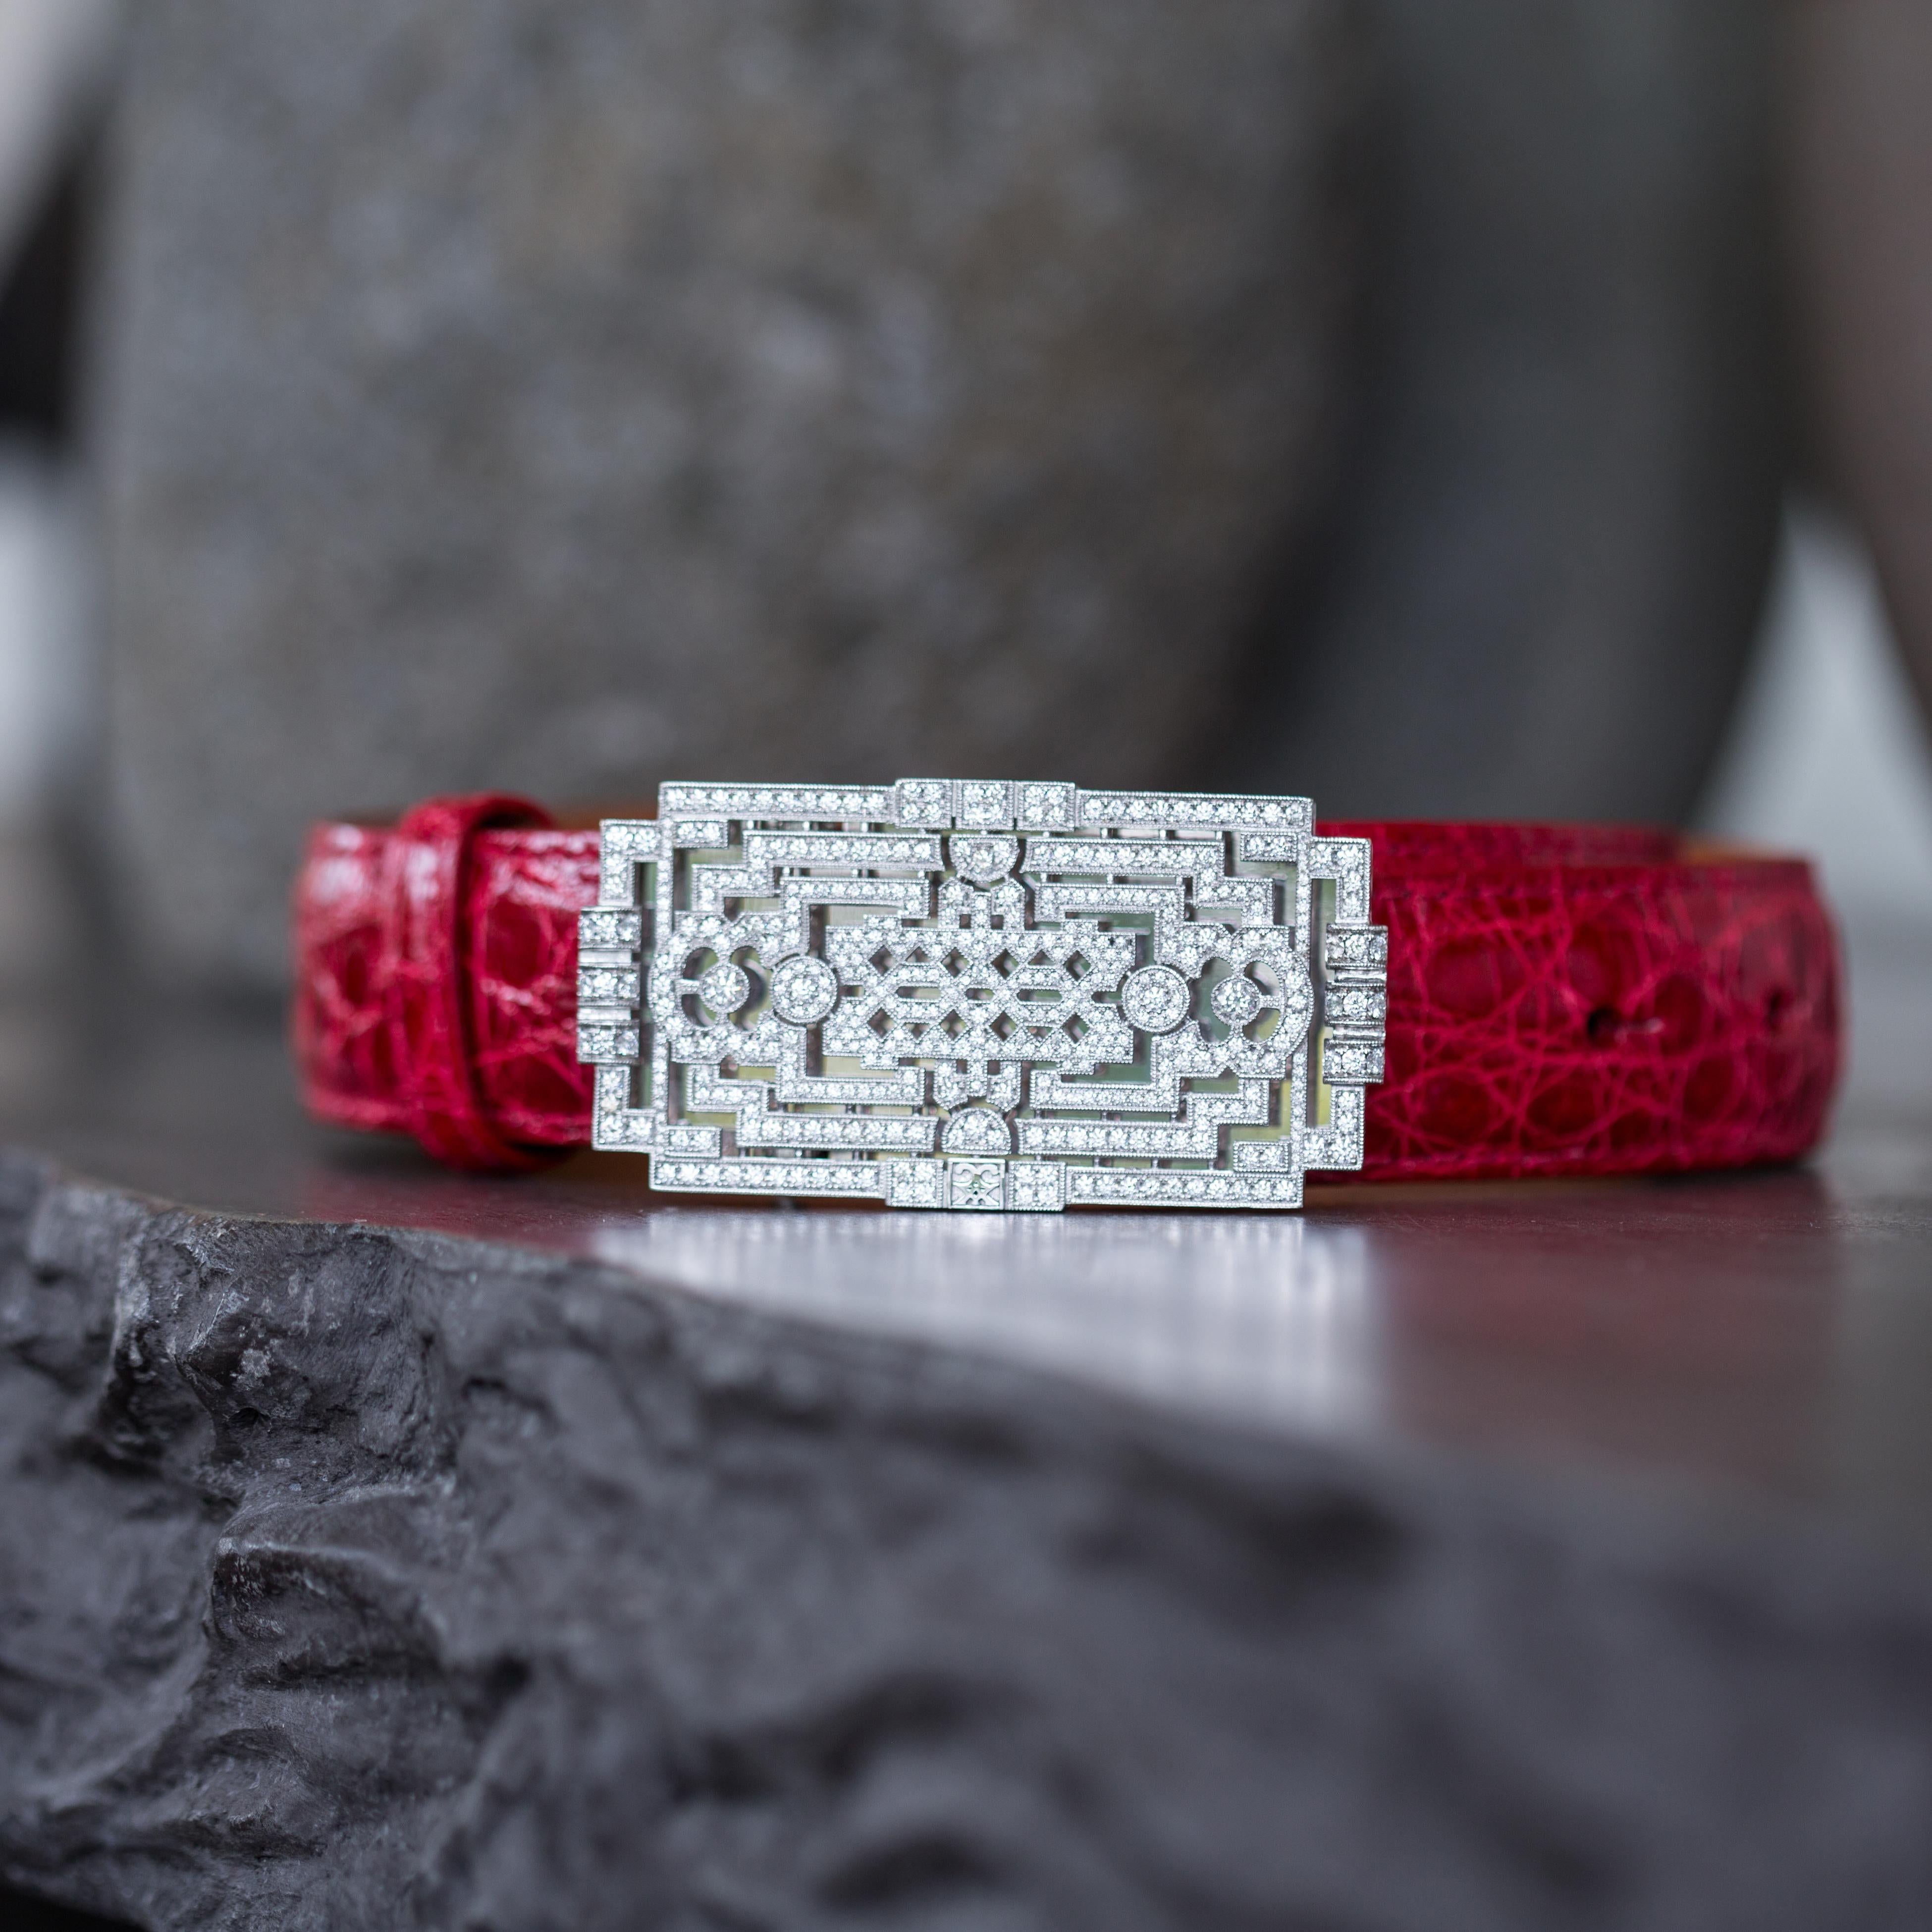 Minerva, the Goddess of Wisdom
Stately and bold, the Minerva Buckle is a contemporary design with symmetrical geometric blocking. Influenced by the art deco style made popular by the greatest thinkers and architects of the last century, the buckle